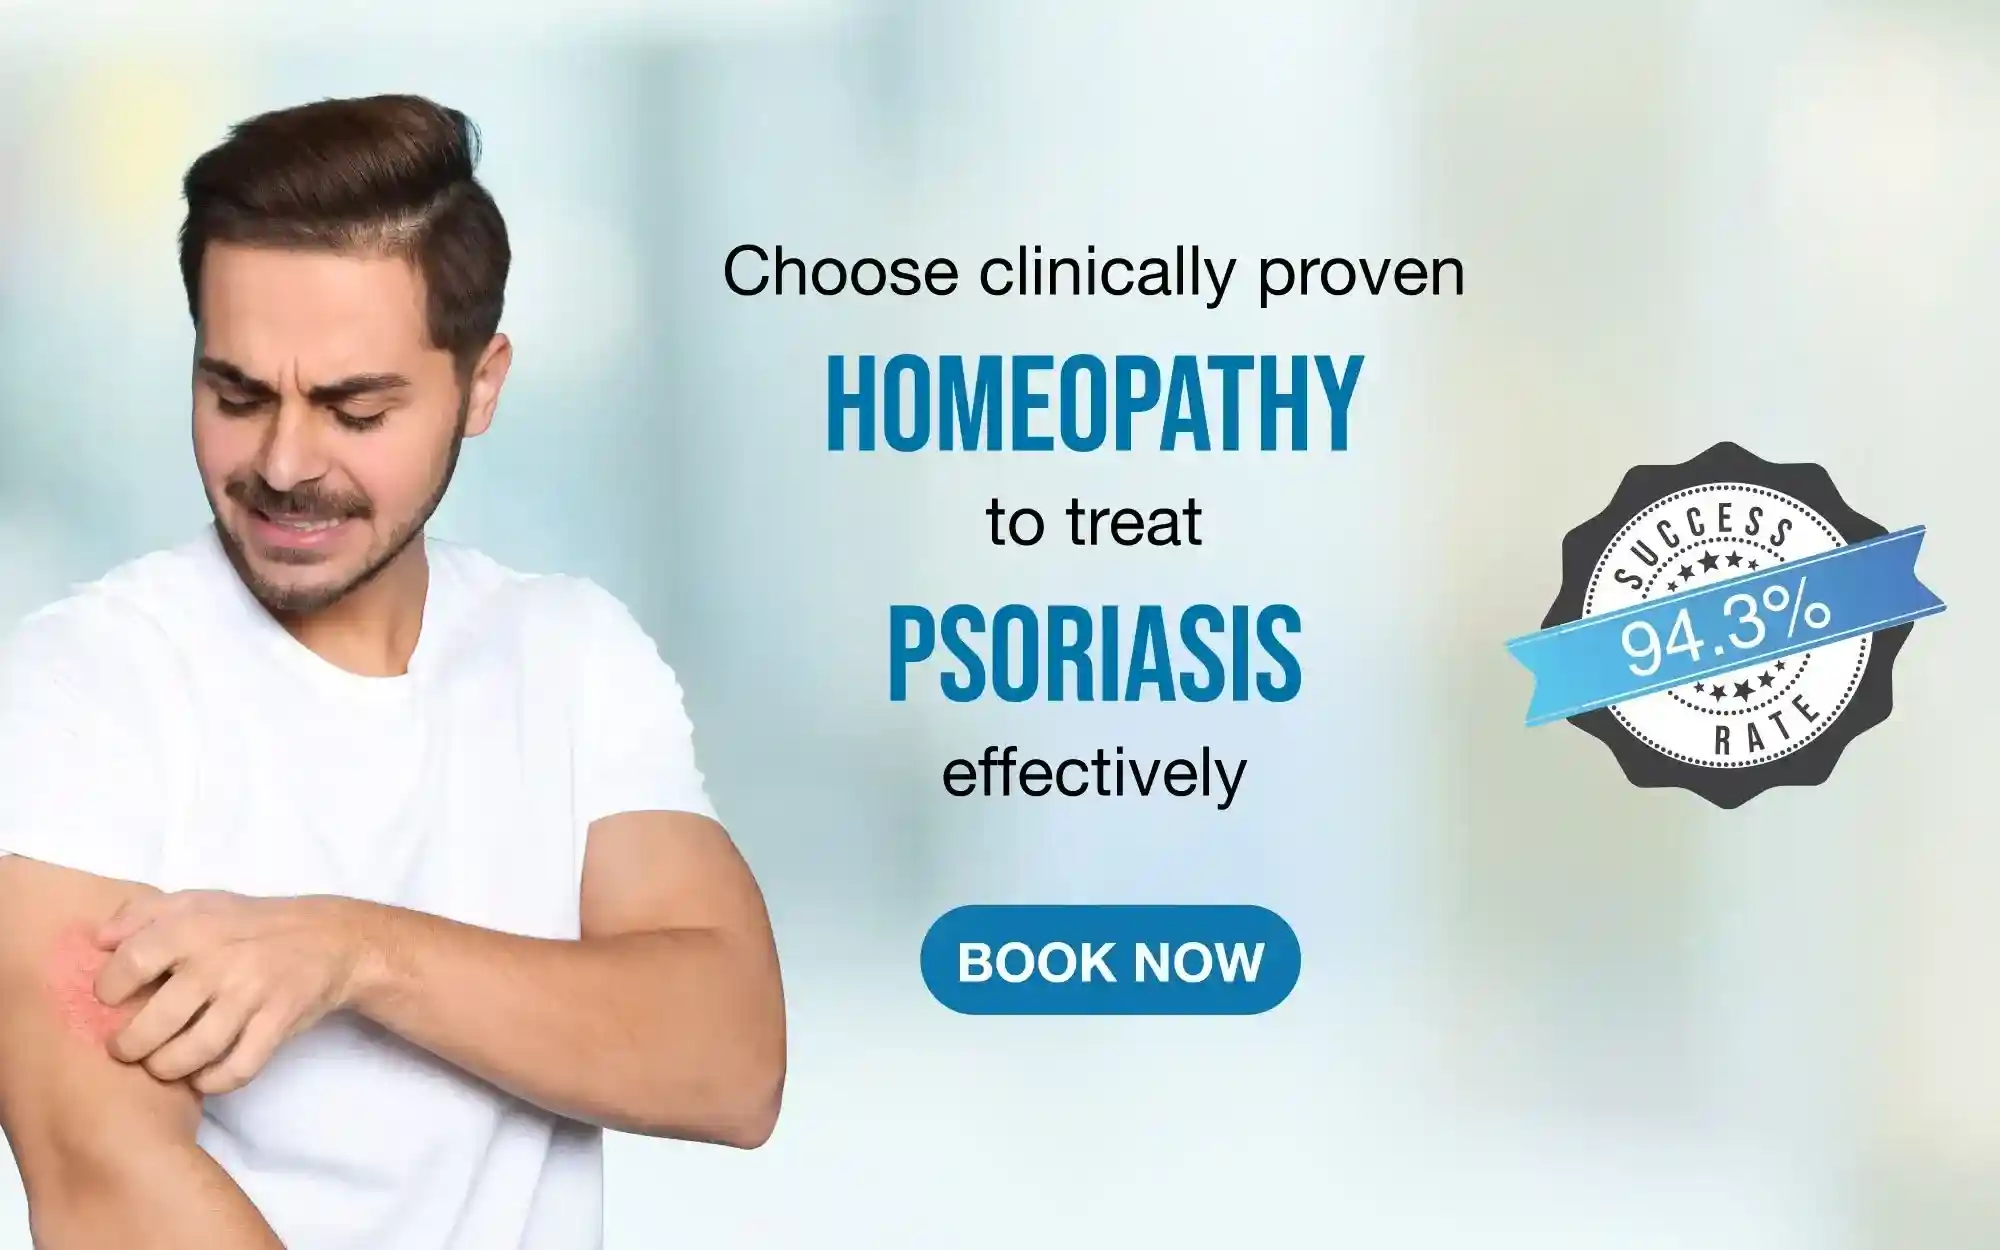 Visit our website: Dr Batra’s™ Homeopathy